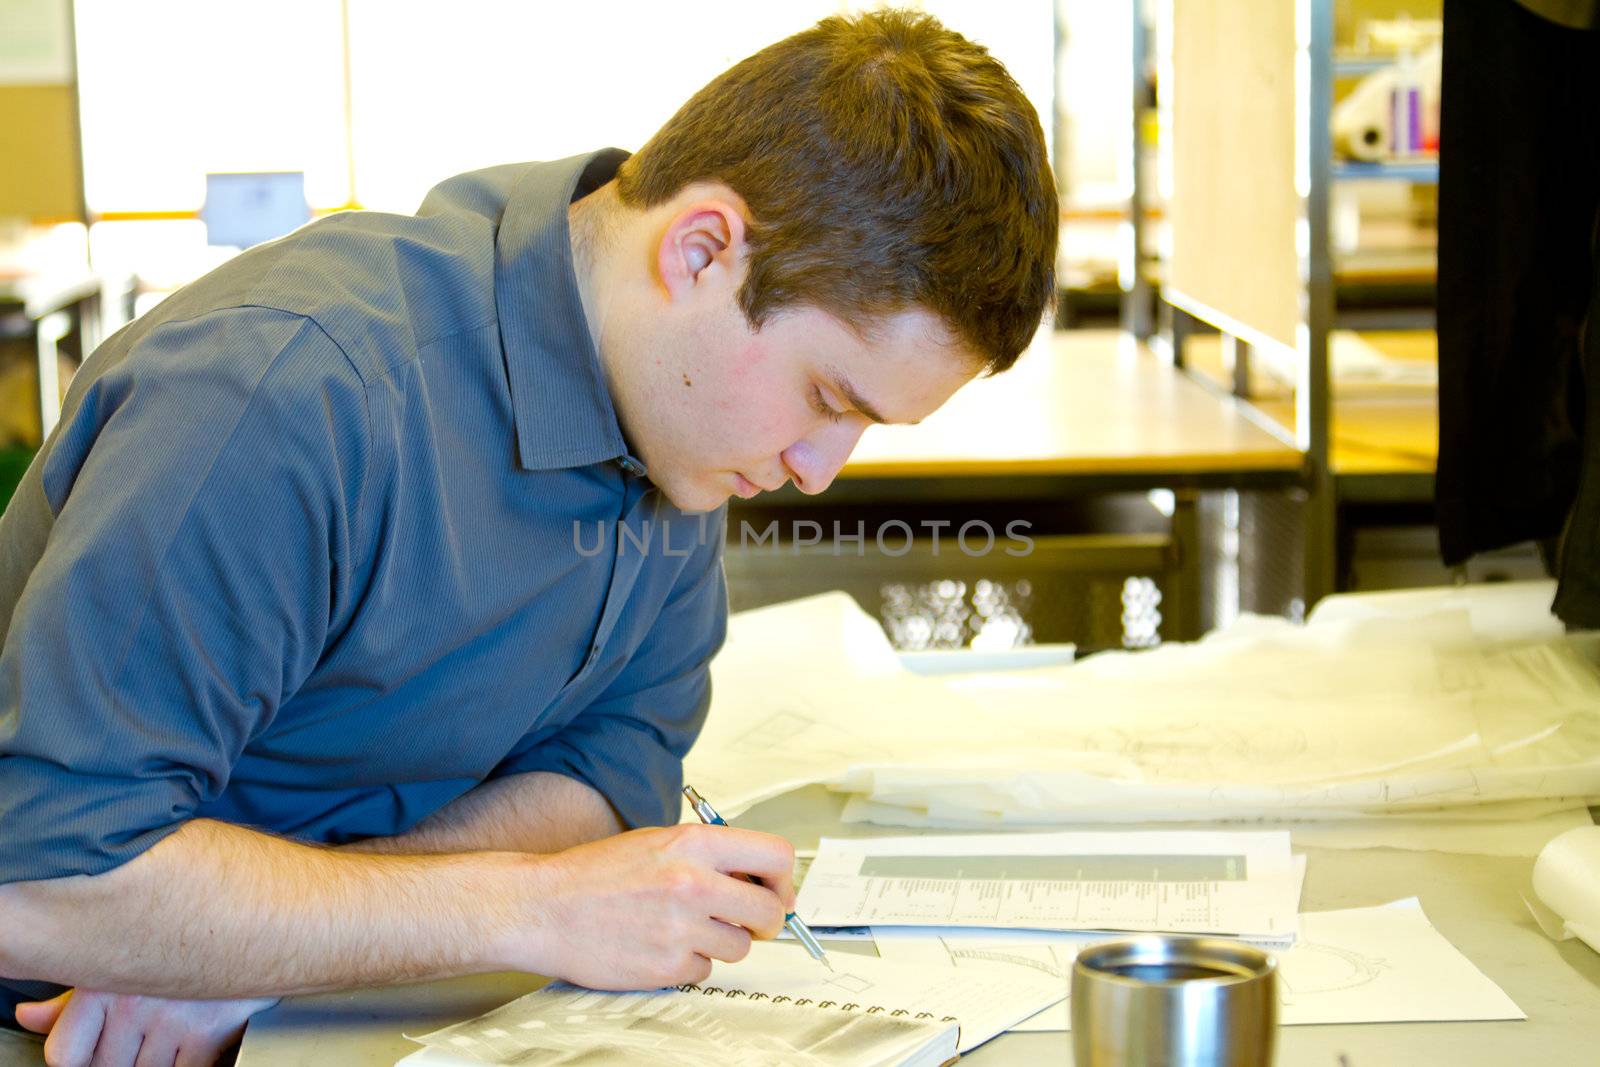 An architect studies in his college work building while drawing plans and preparing work for a class.